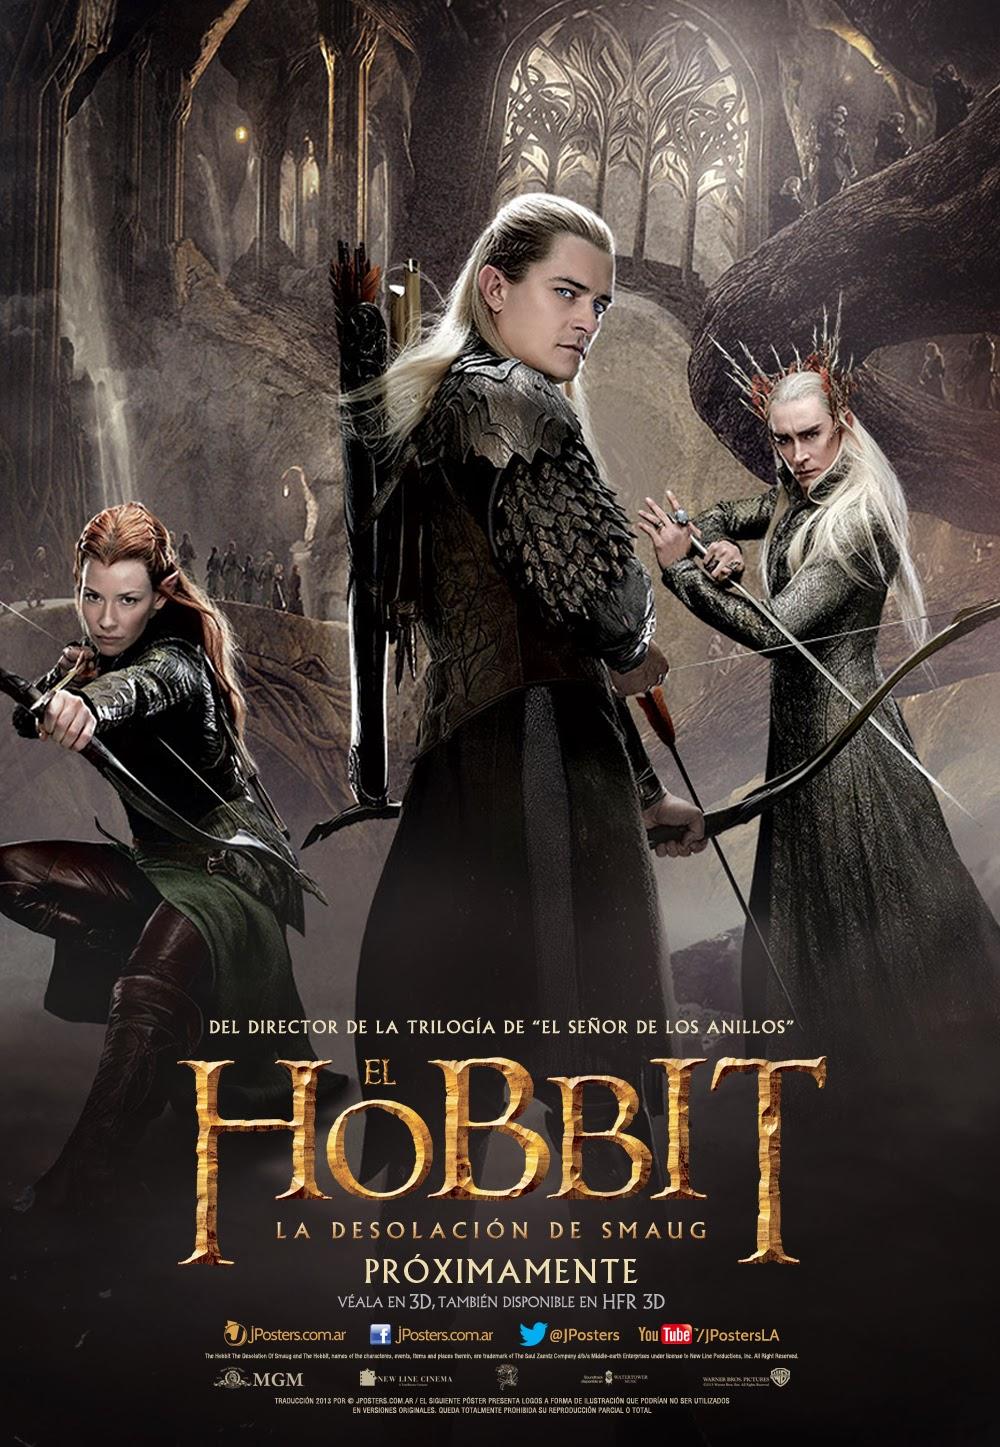 the-hobbit-the-desolation-of-smaug-intl-poster-2.jpg